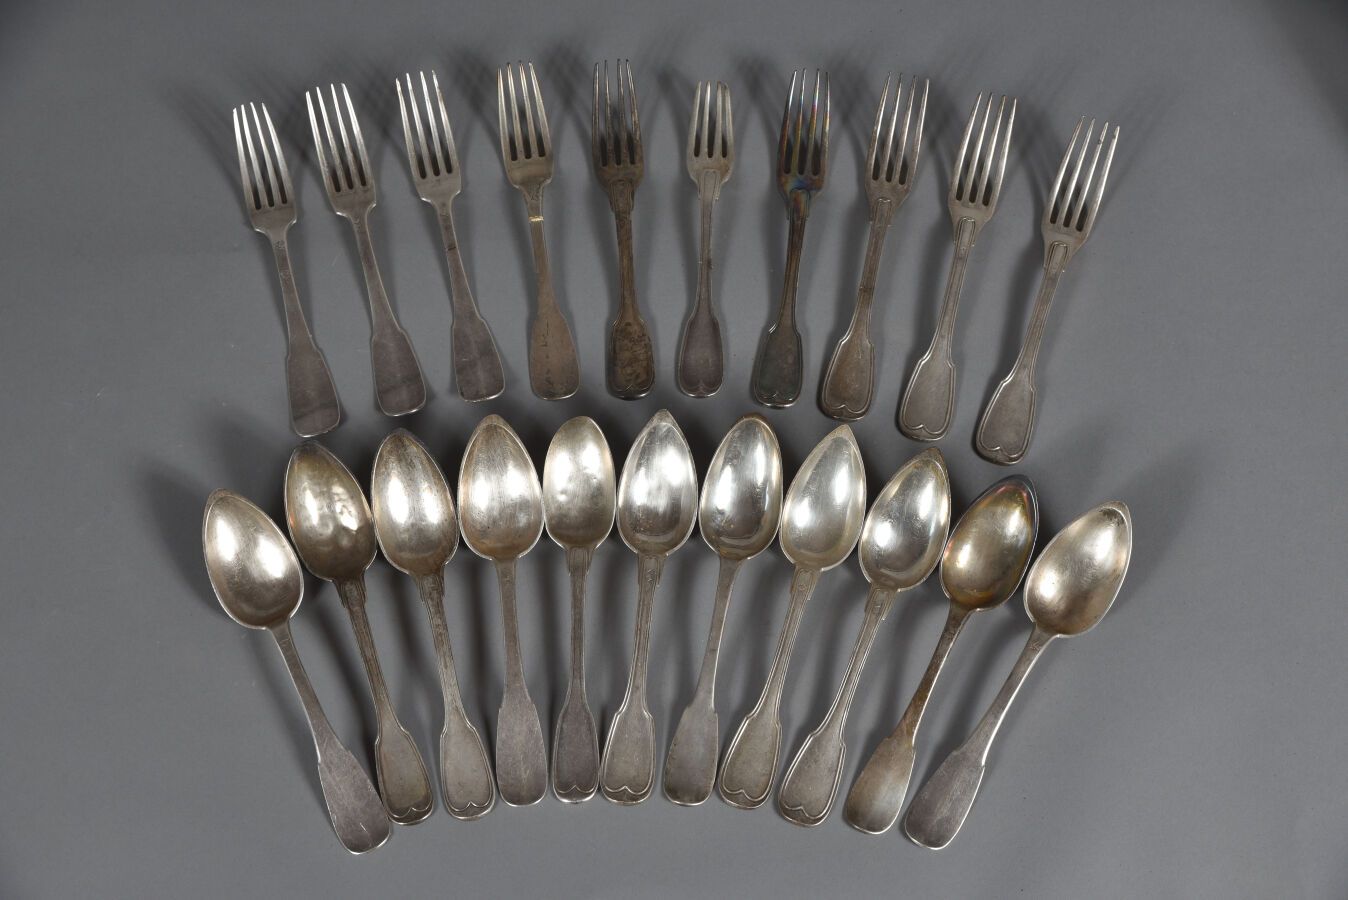 Null Set of silver flatware, filets or uni-flat pattern, some figured, some embo&hellip;